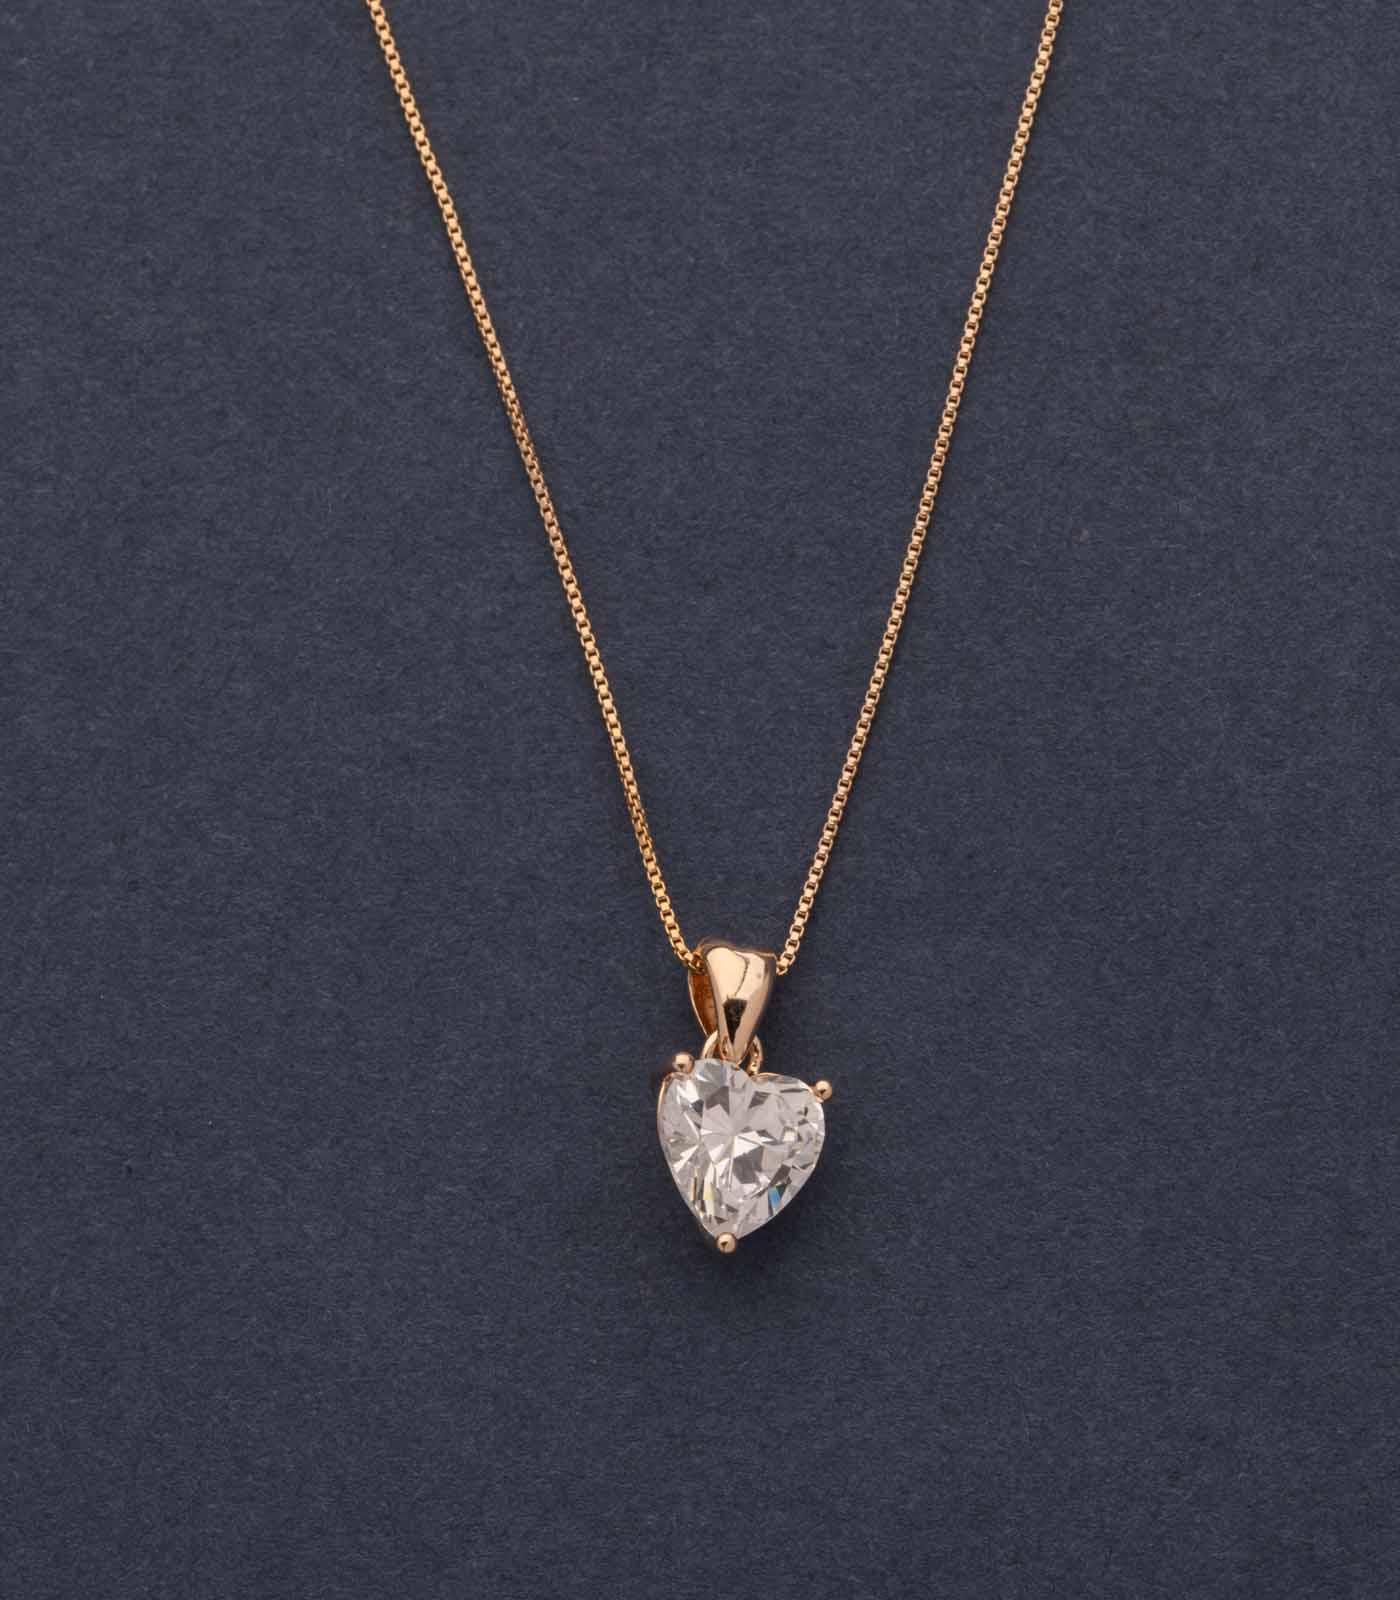 Golden Hand-Crafted Heart Of Gems Necklace (Brass)